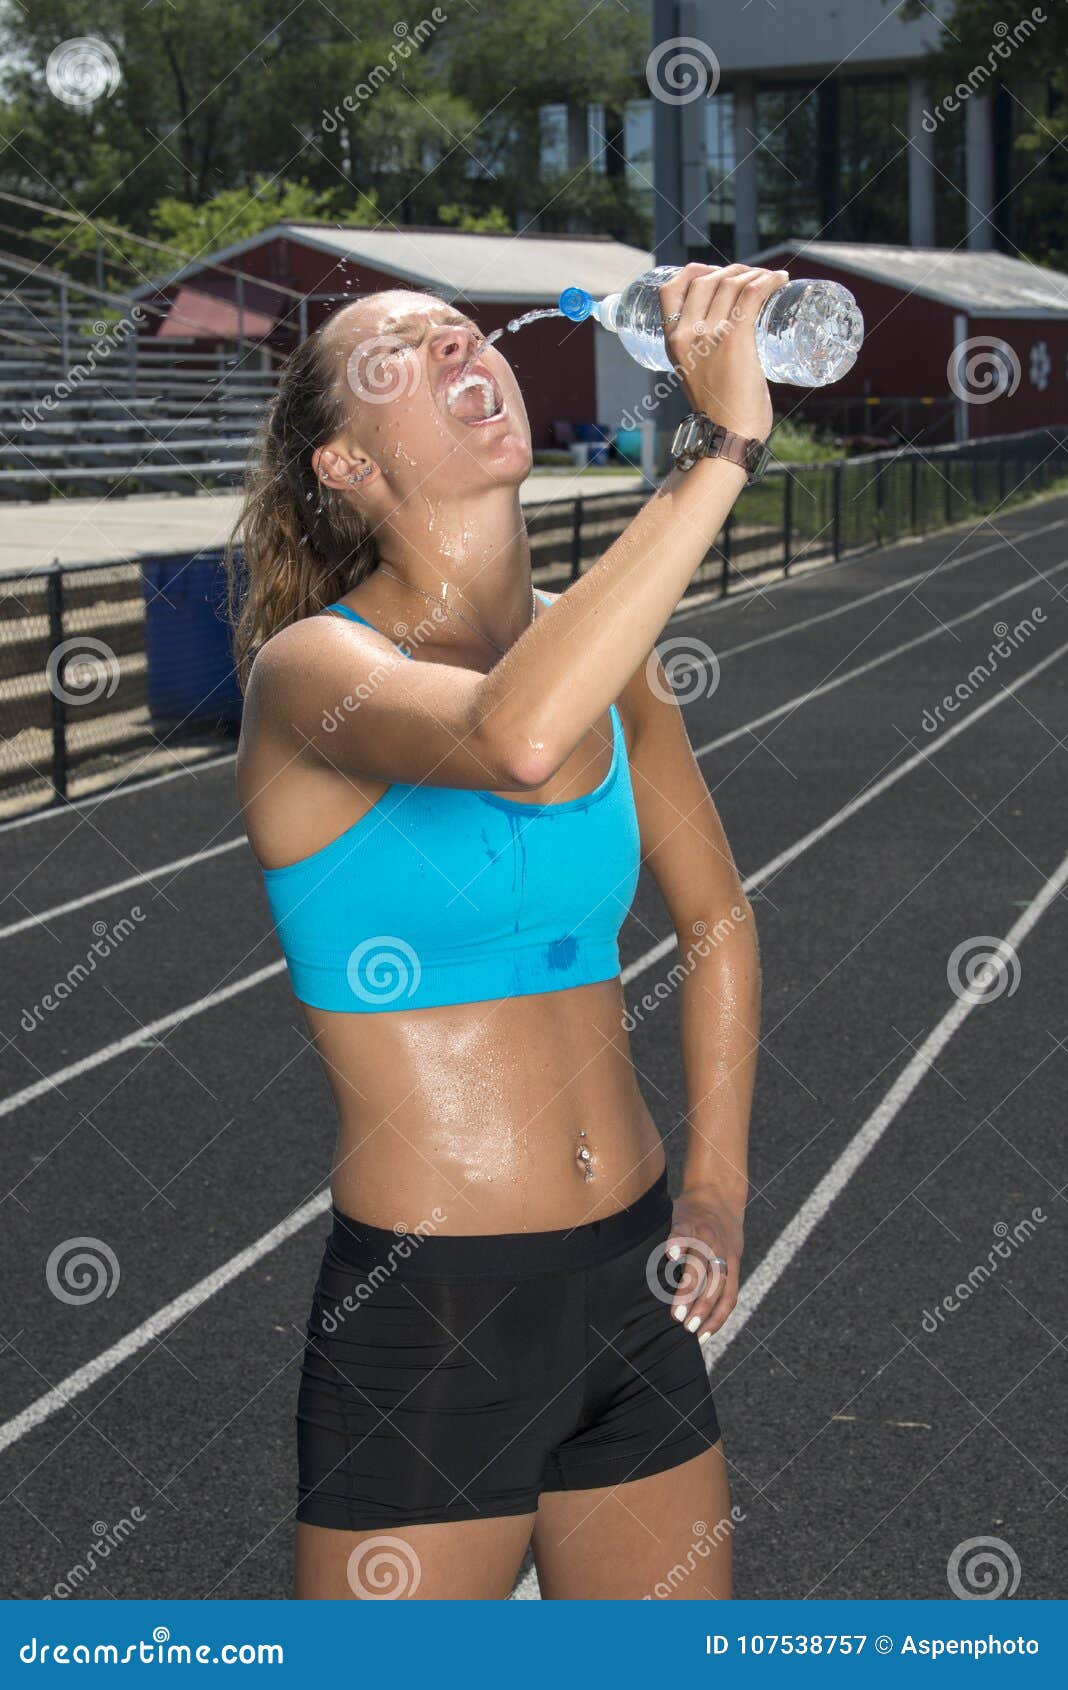 https://thumbs.dreamstime.com/z/cute-fit-young-teen-caucasian-girl-working-out-outdoor-track-glistens-sweat-blue-sports-bra-as-pours-water-her-107538757.jpg